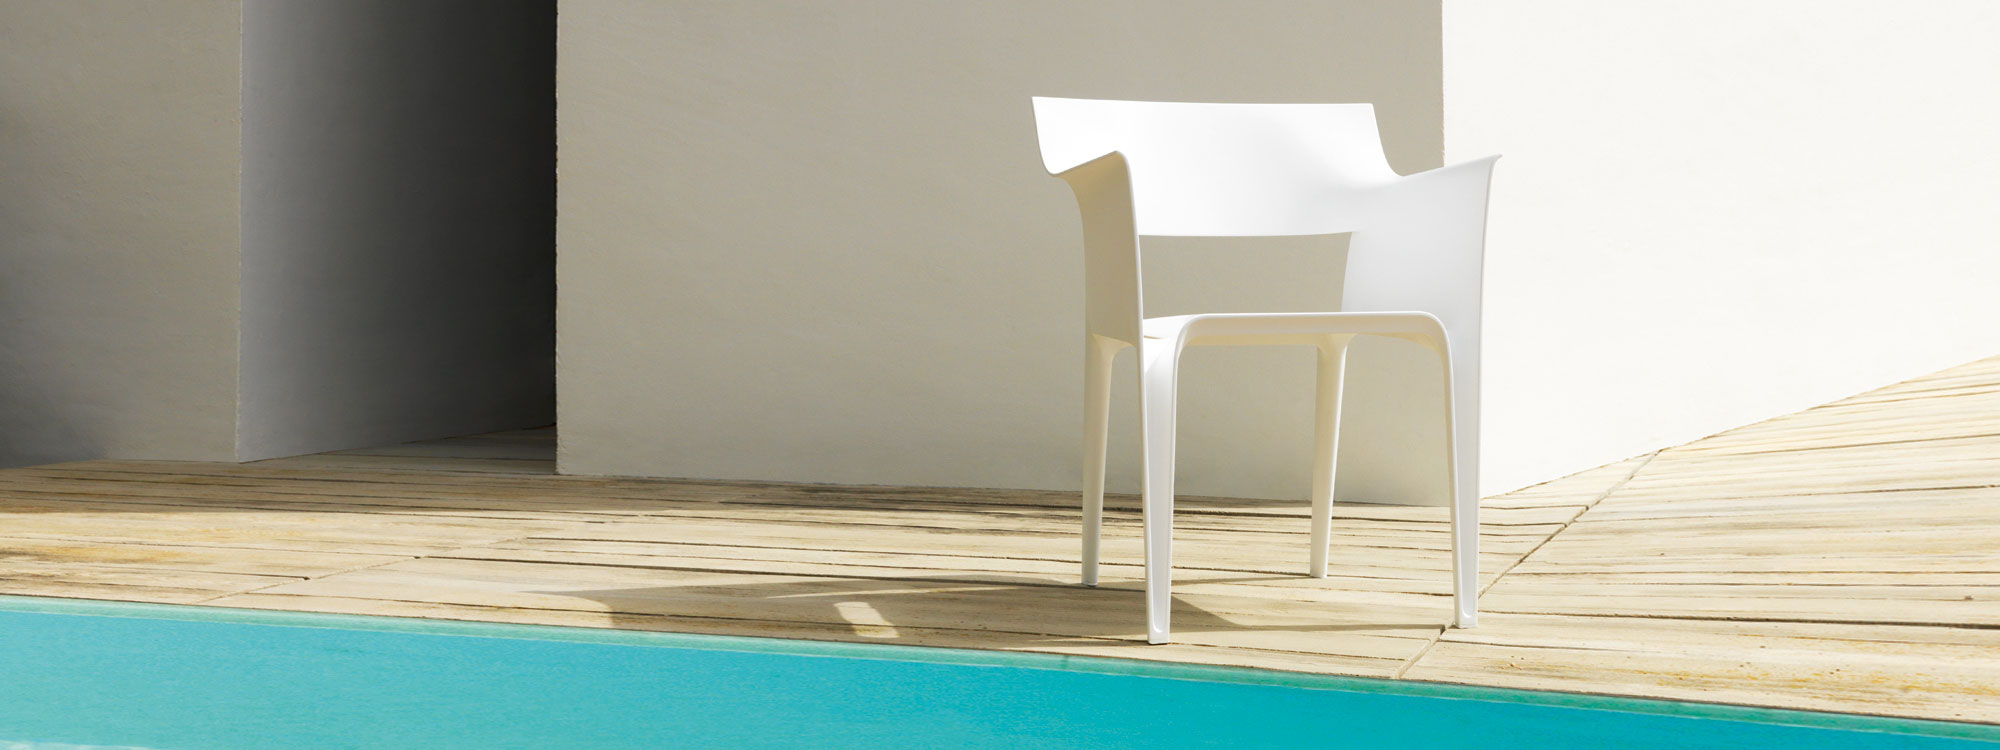 Image of white Vondom Pedrera recycled plastic chair on sunny wooden decking next to swimming pool